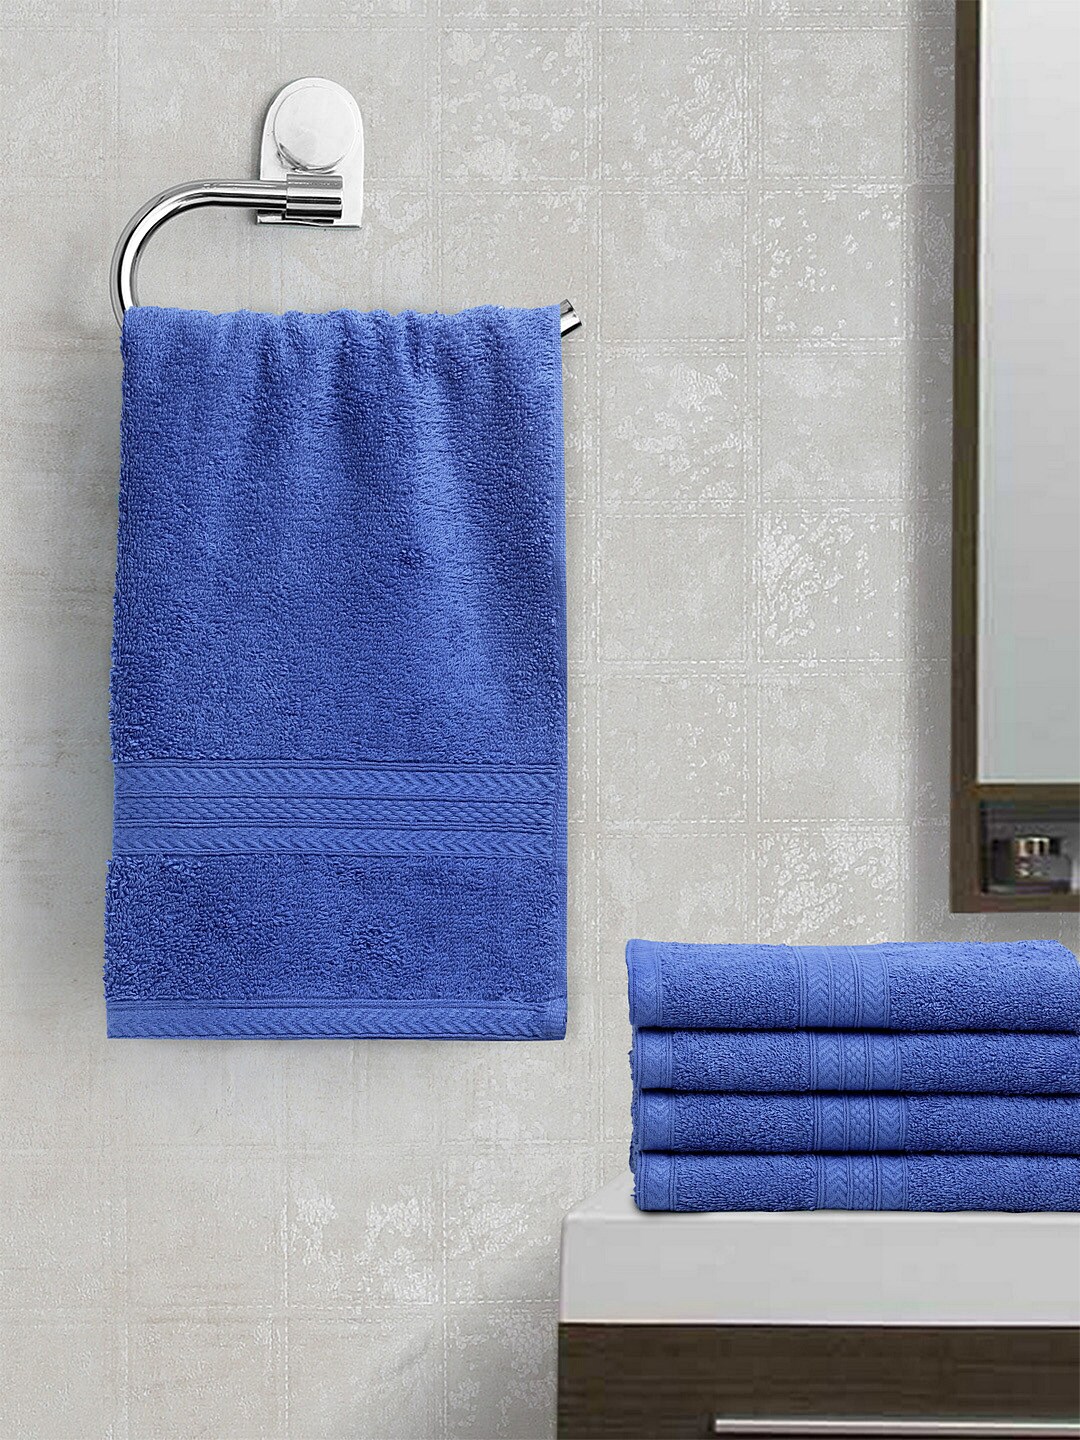 BOMBAY DYEING Unisex Set Of 5 Blue Solid Tulip 450 GSM Hand Towels Price in India